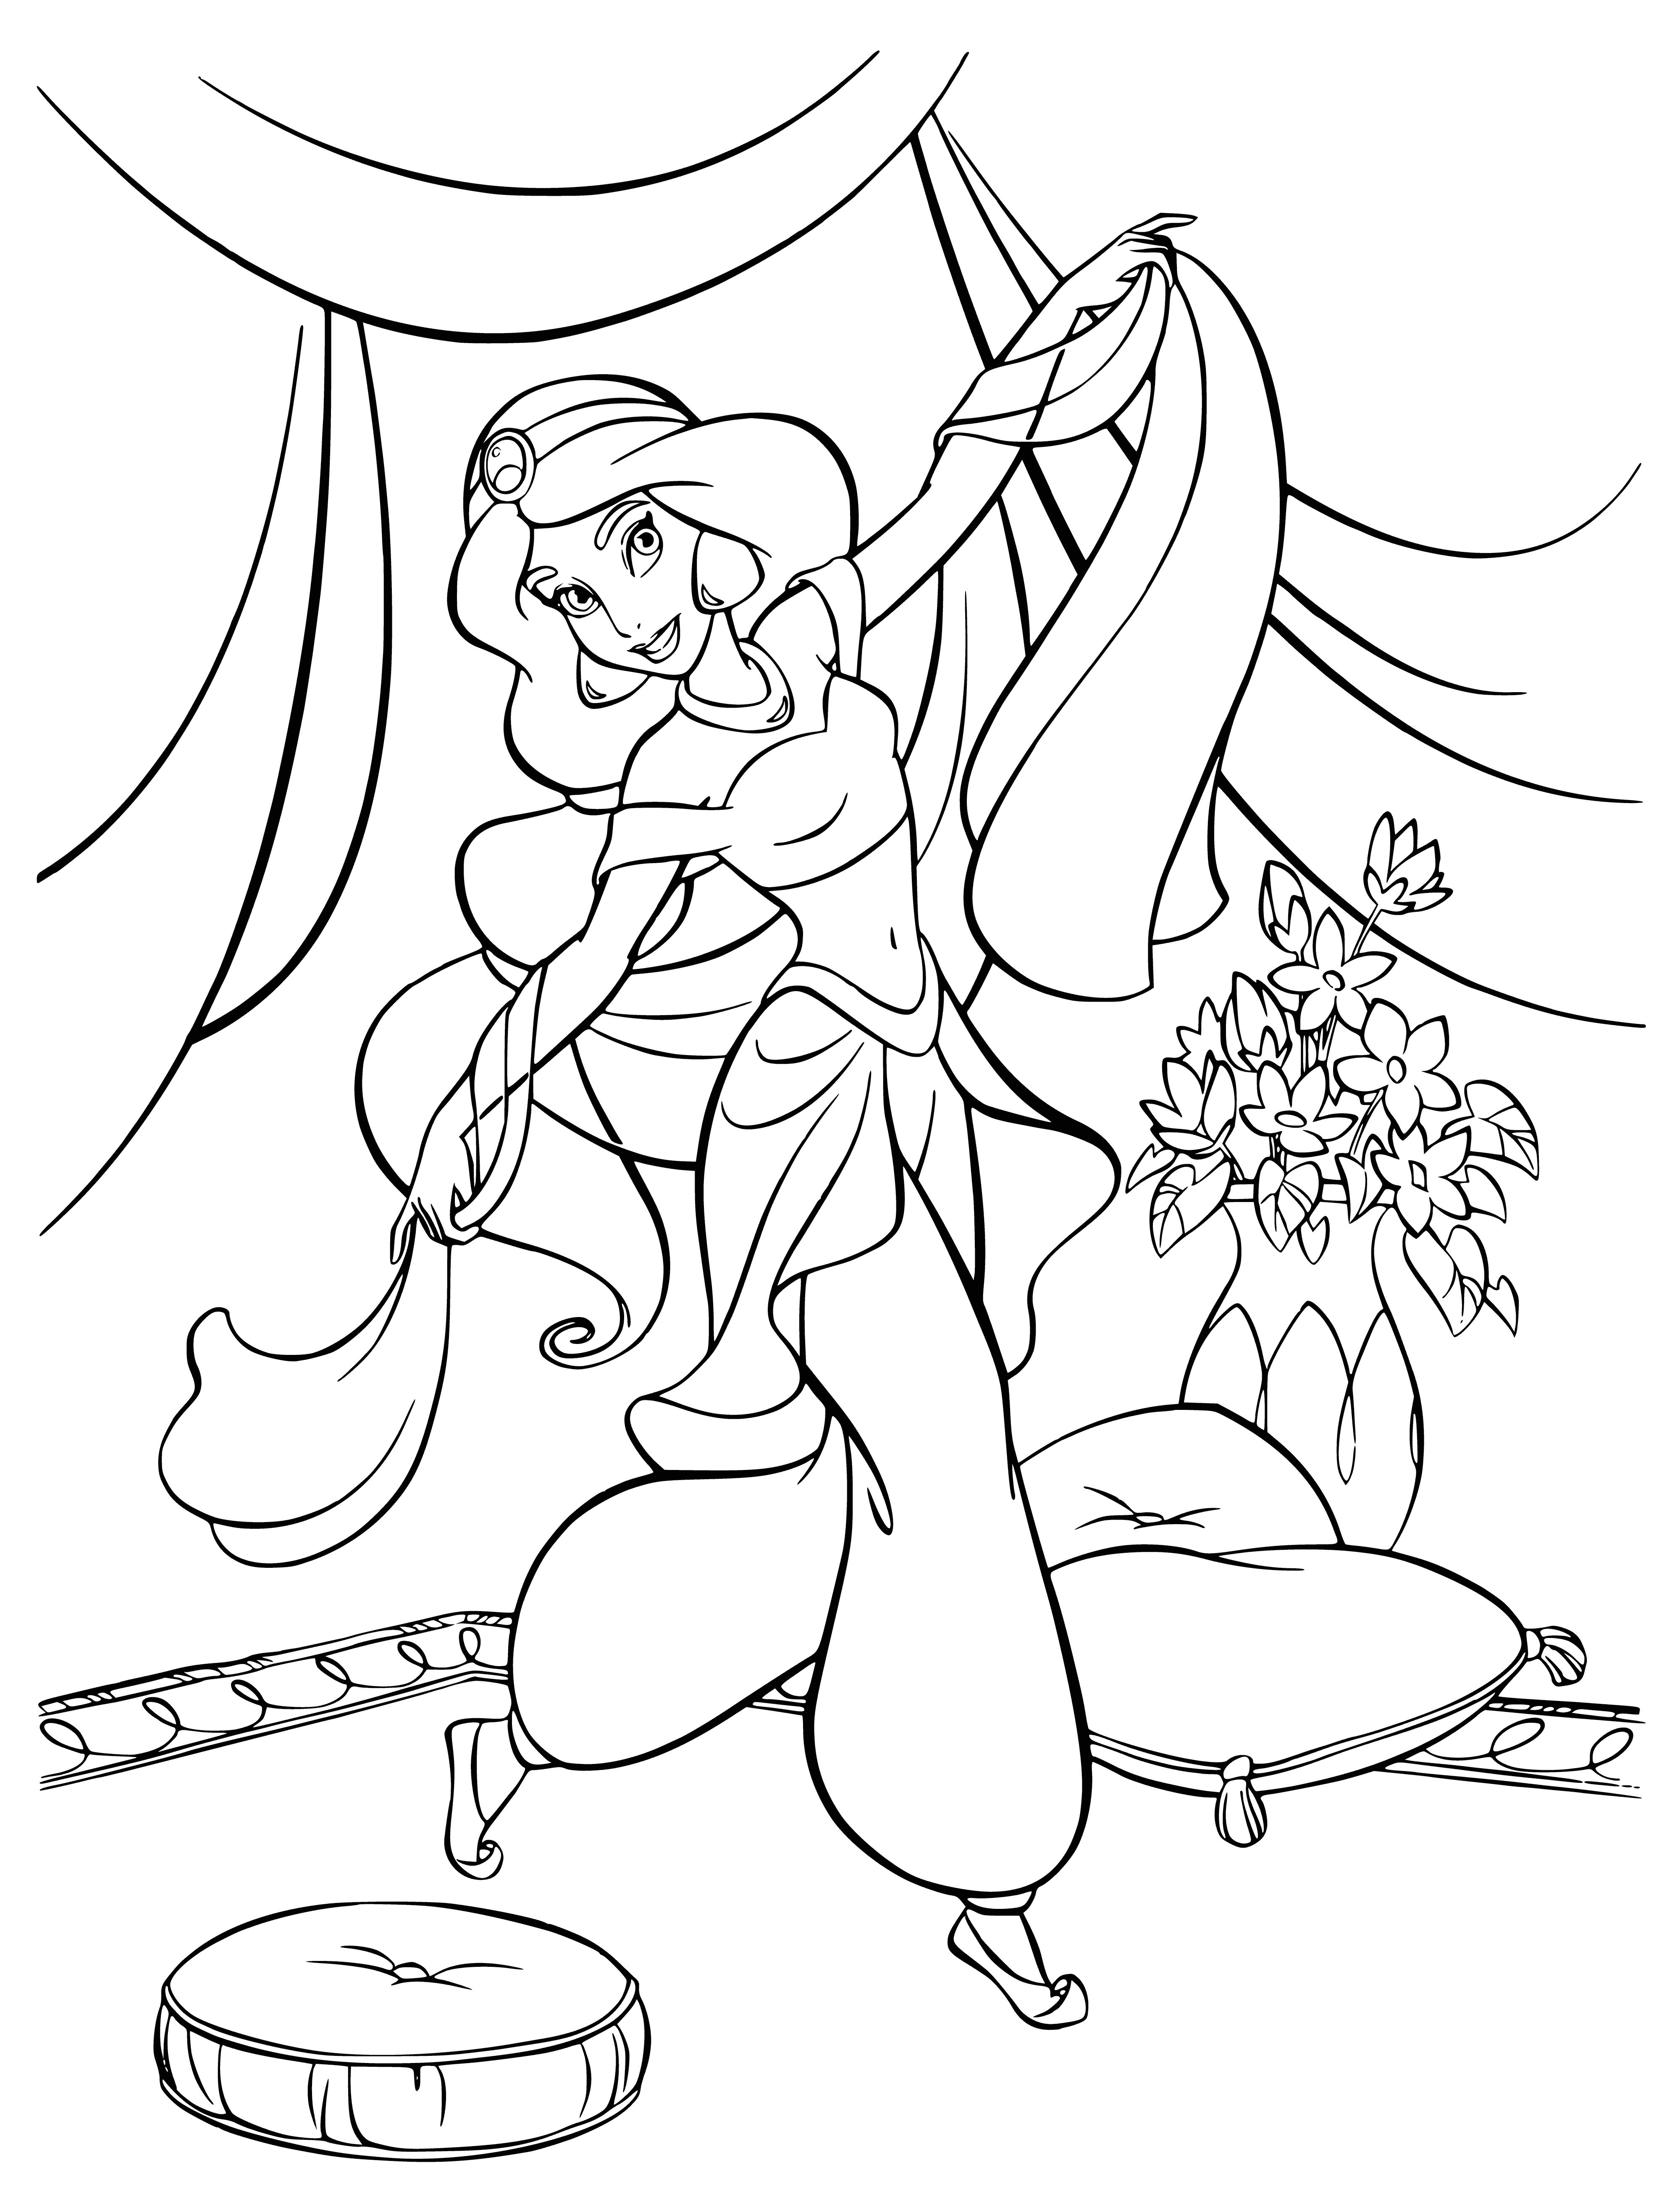 coloring page: Jasmine stands in a blue and gold outfit, with her hair in a bun, looking out a large window at the city.